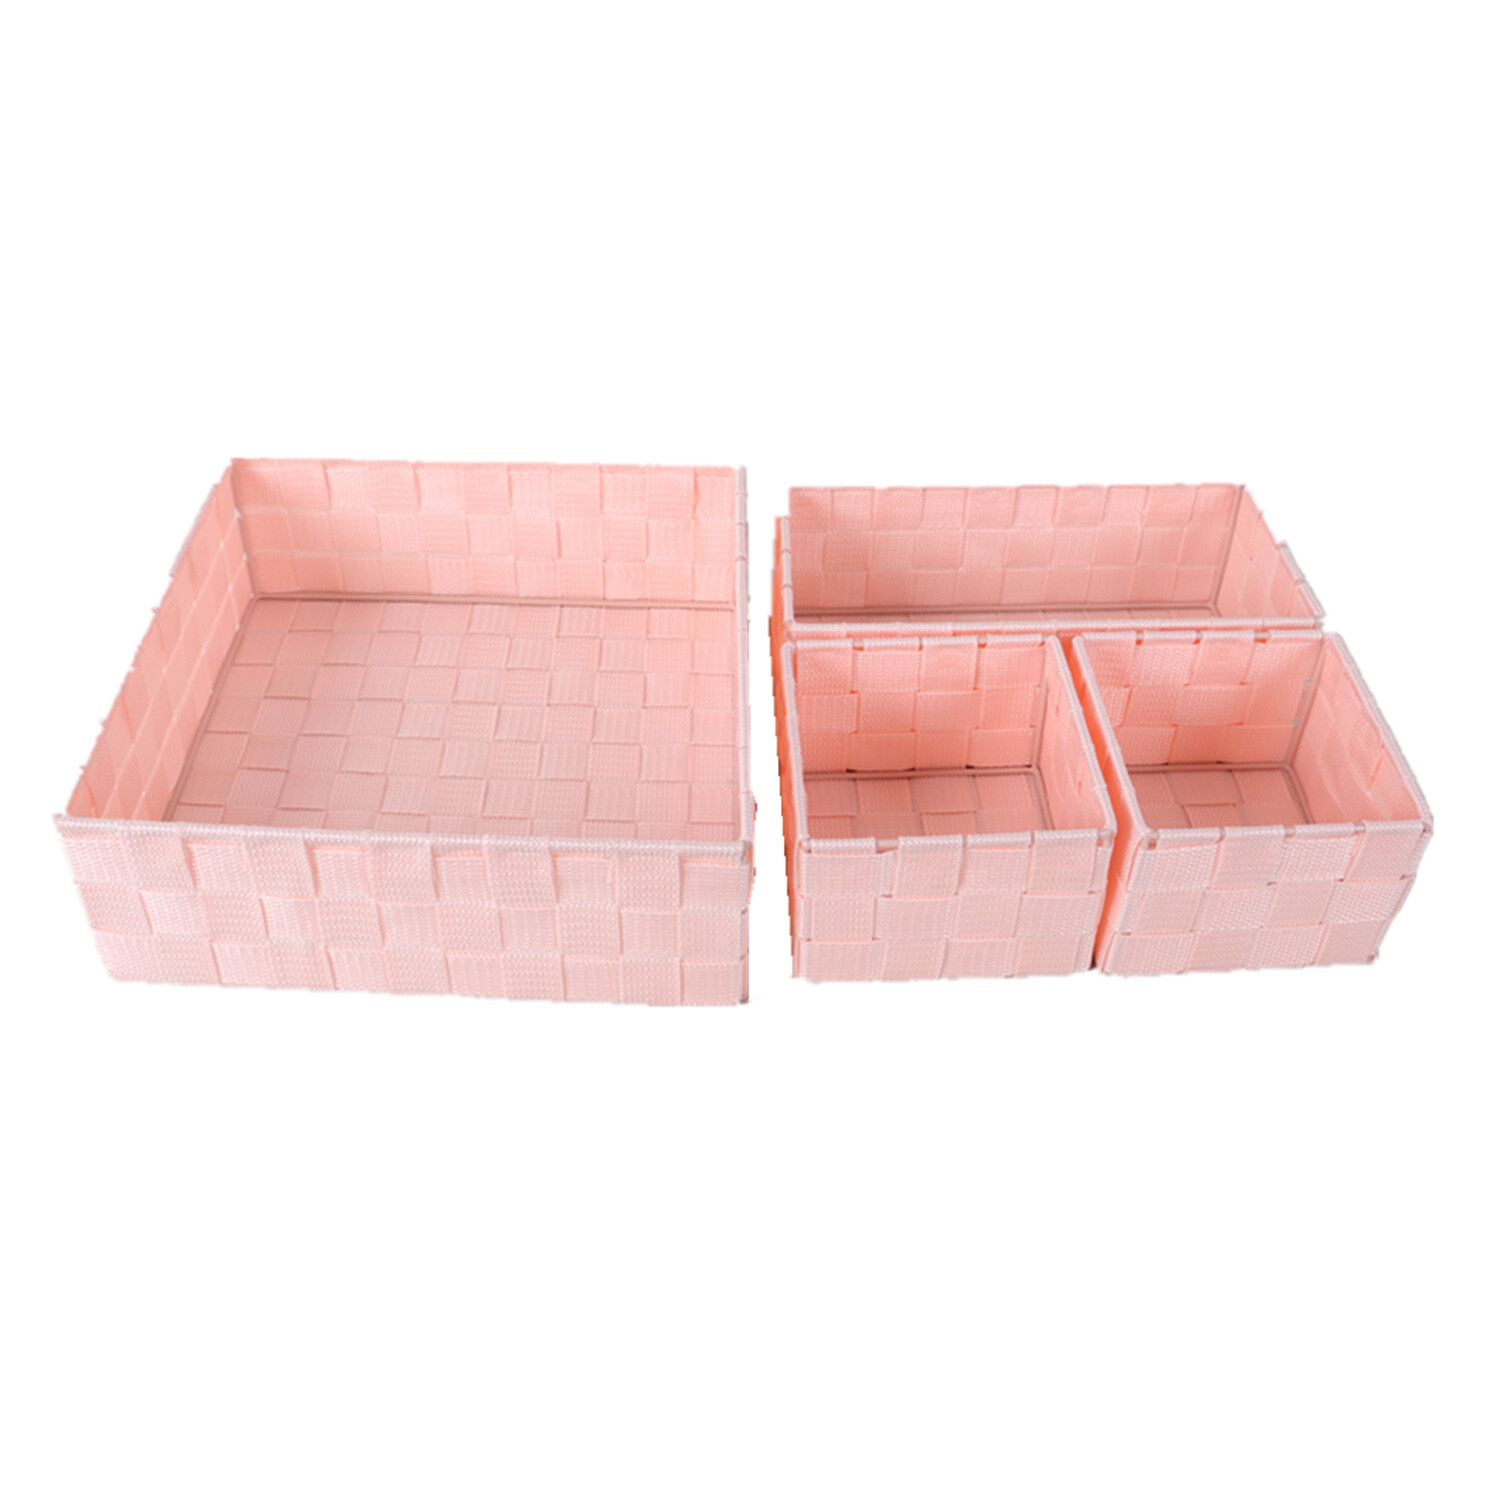 Pink Woven Storage Baskets 4 Pack Image